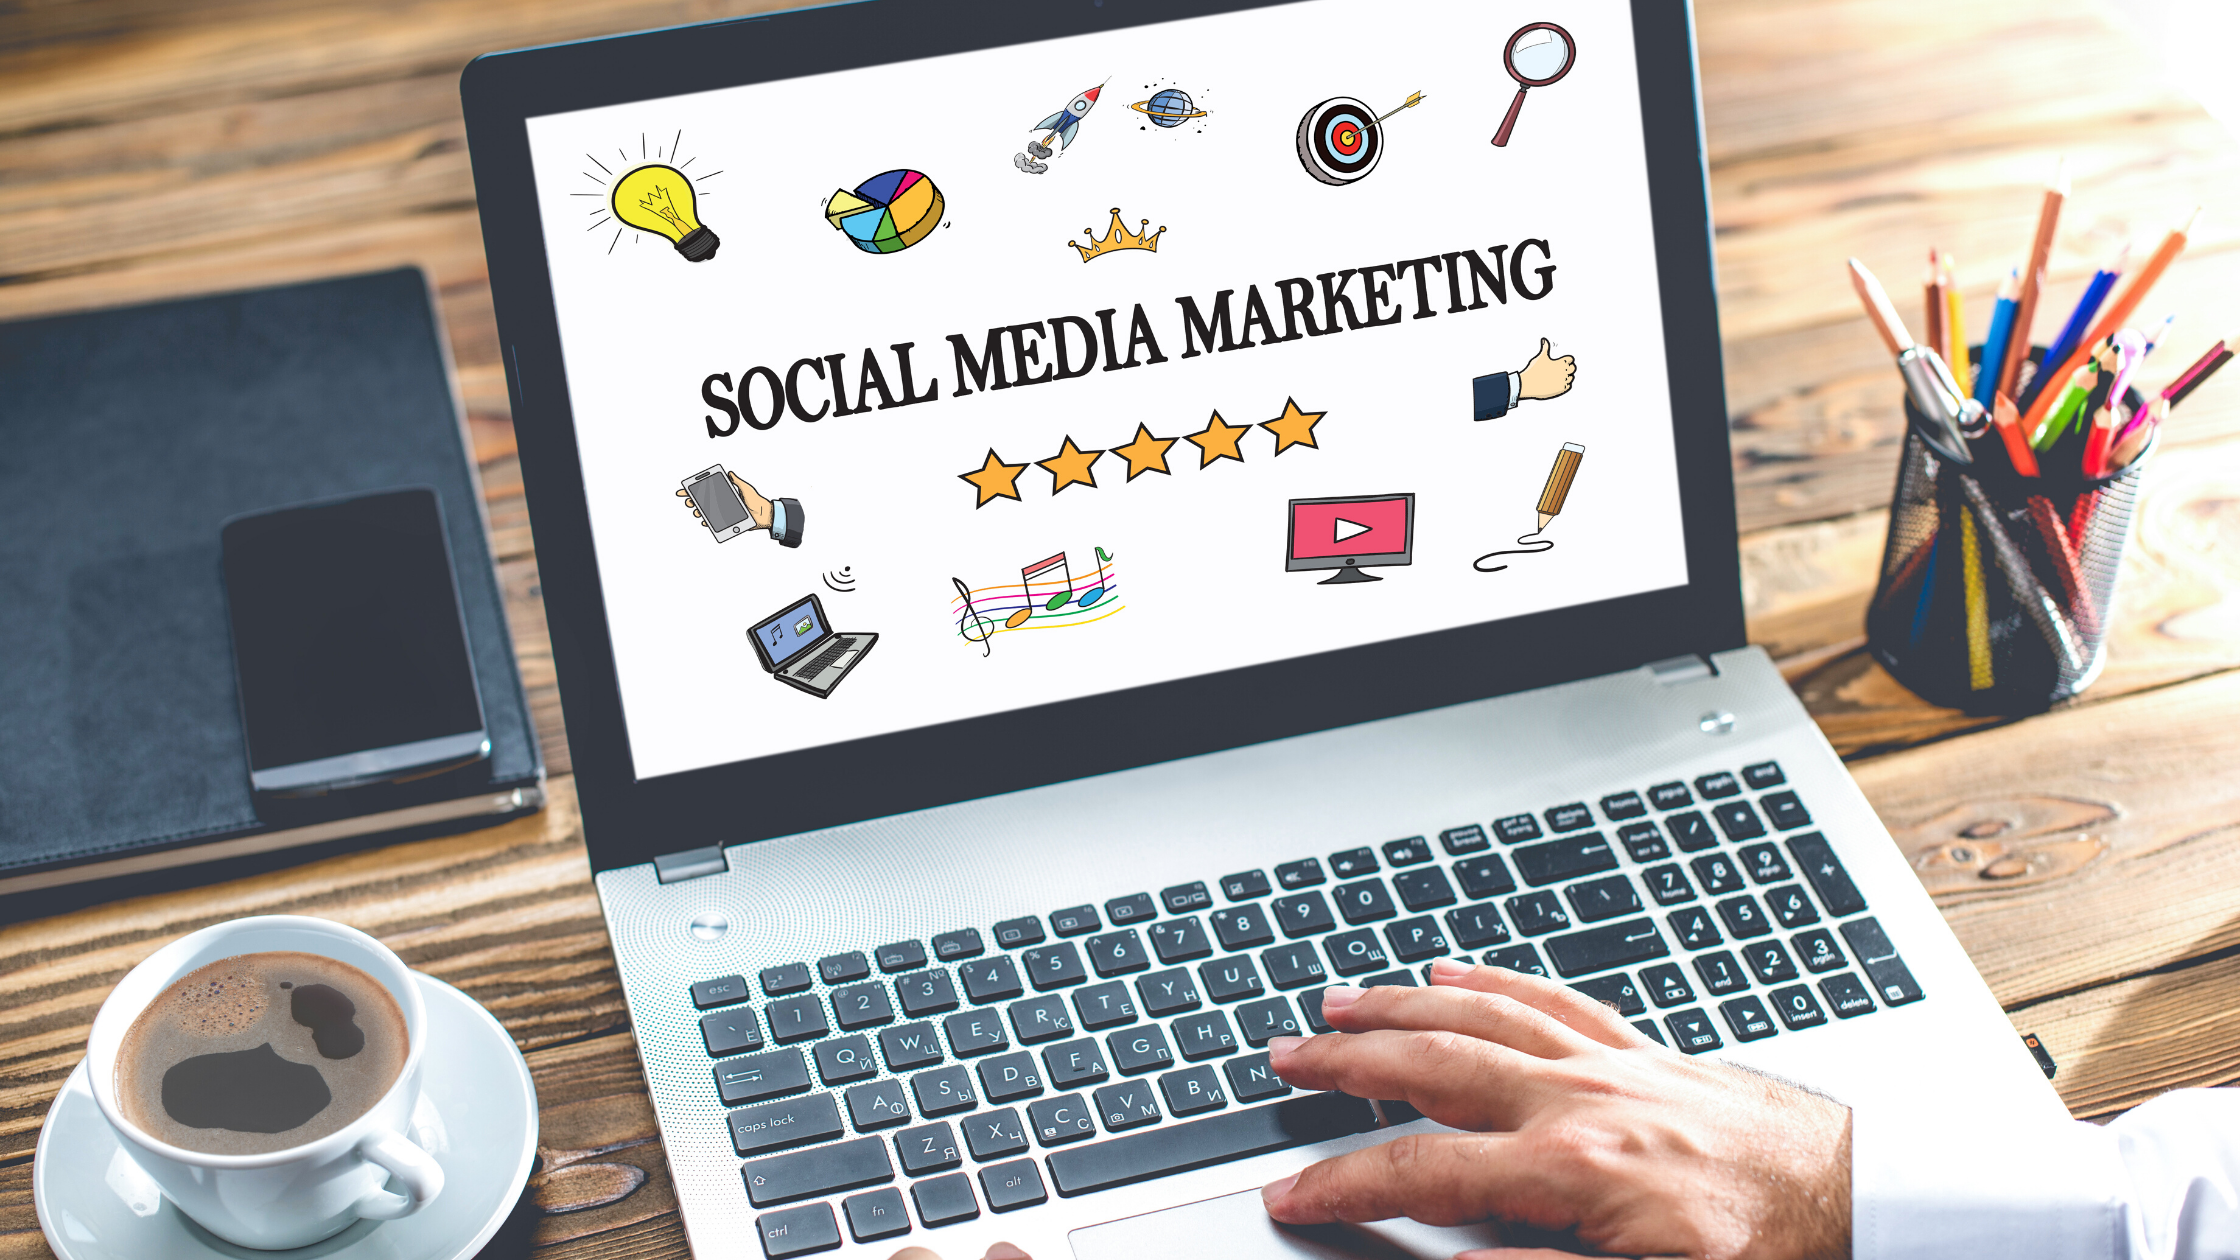 Tips to make your social marketing better